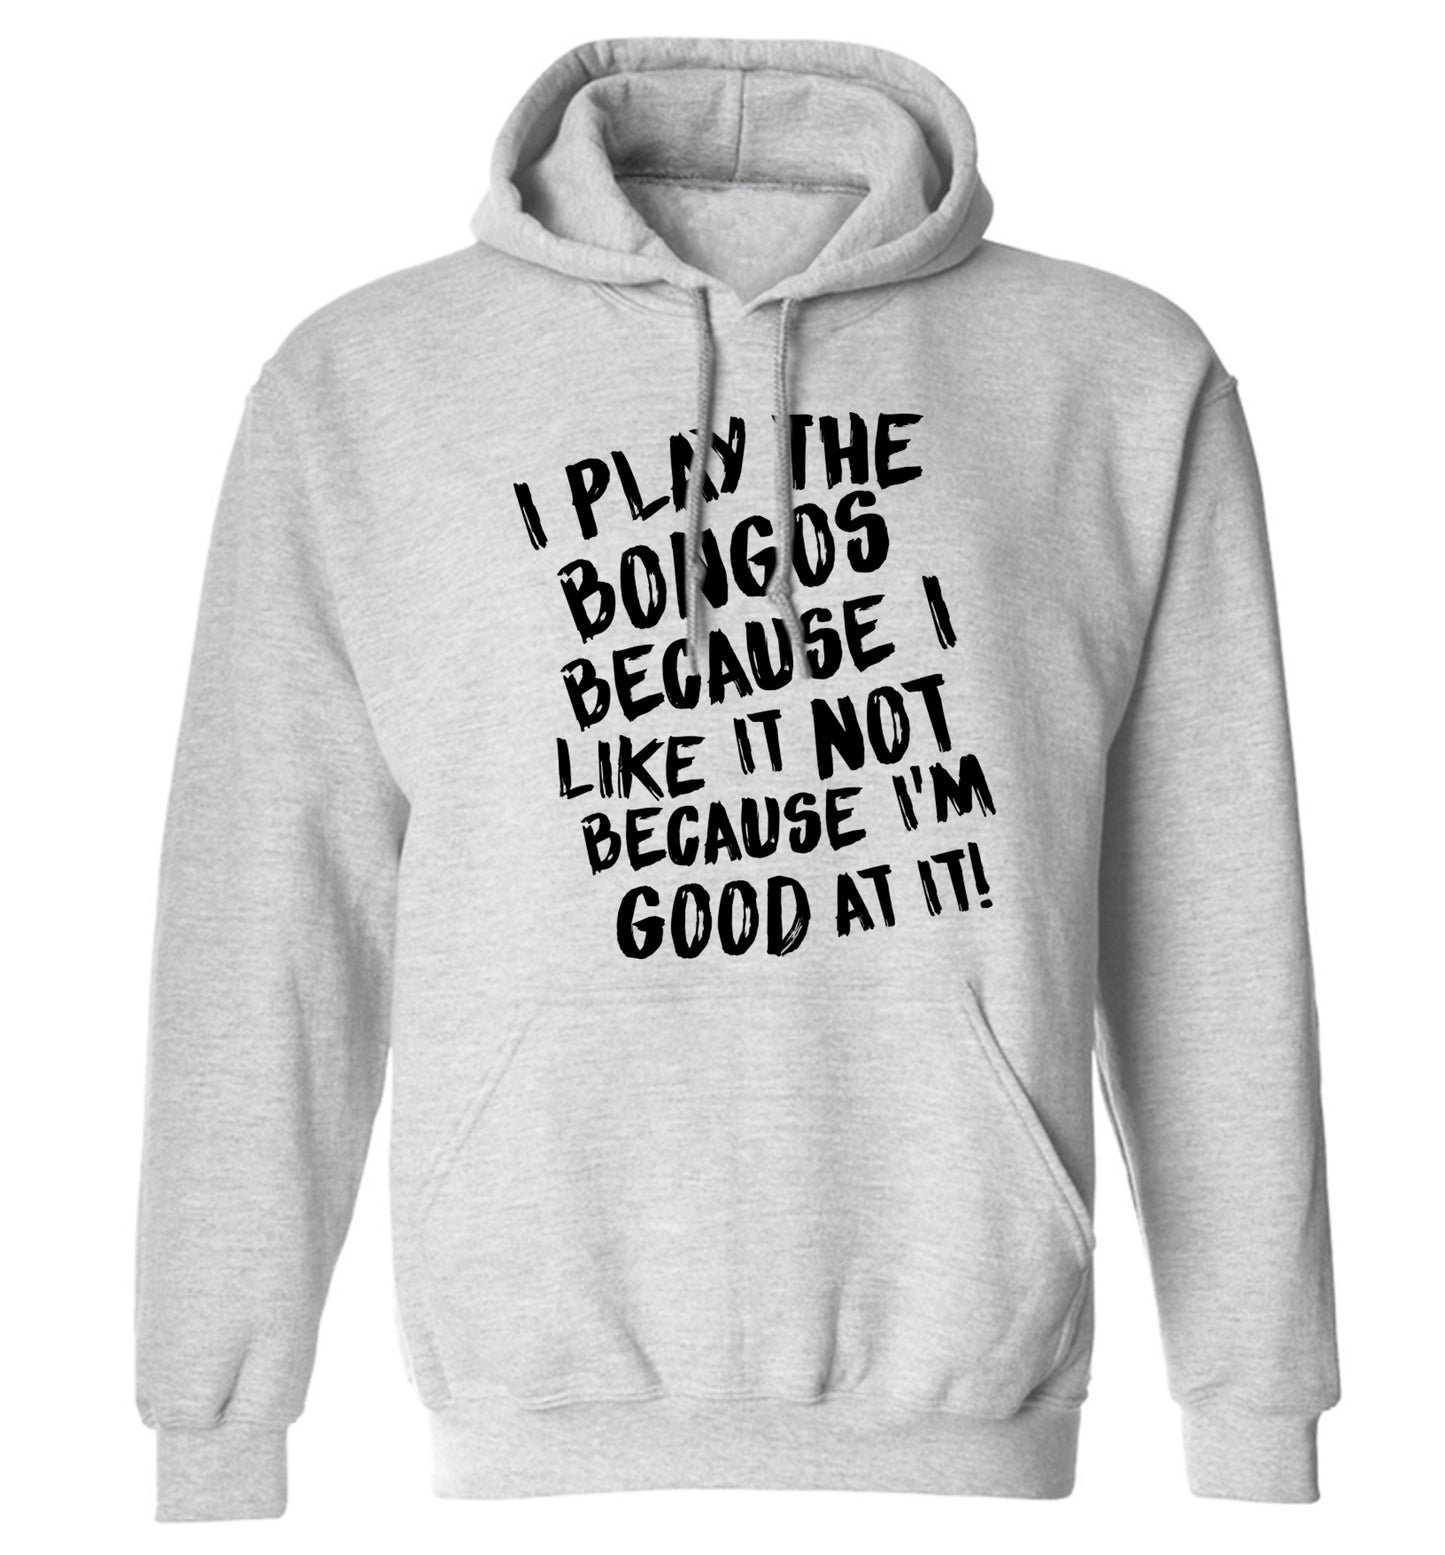 I play the bongos because I like it not because I'm good at it adults unisex grey hoodie 2XL